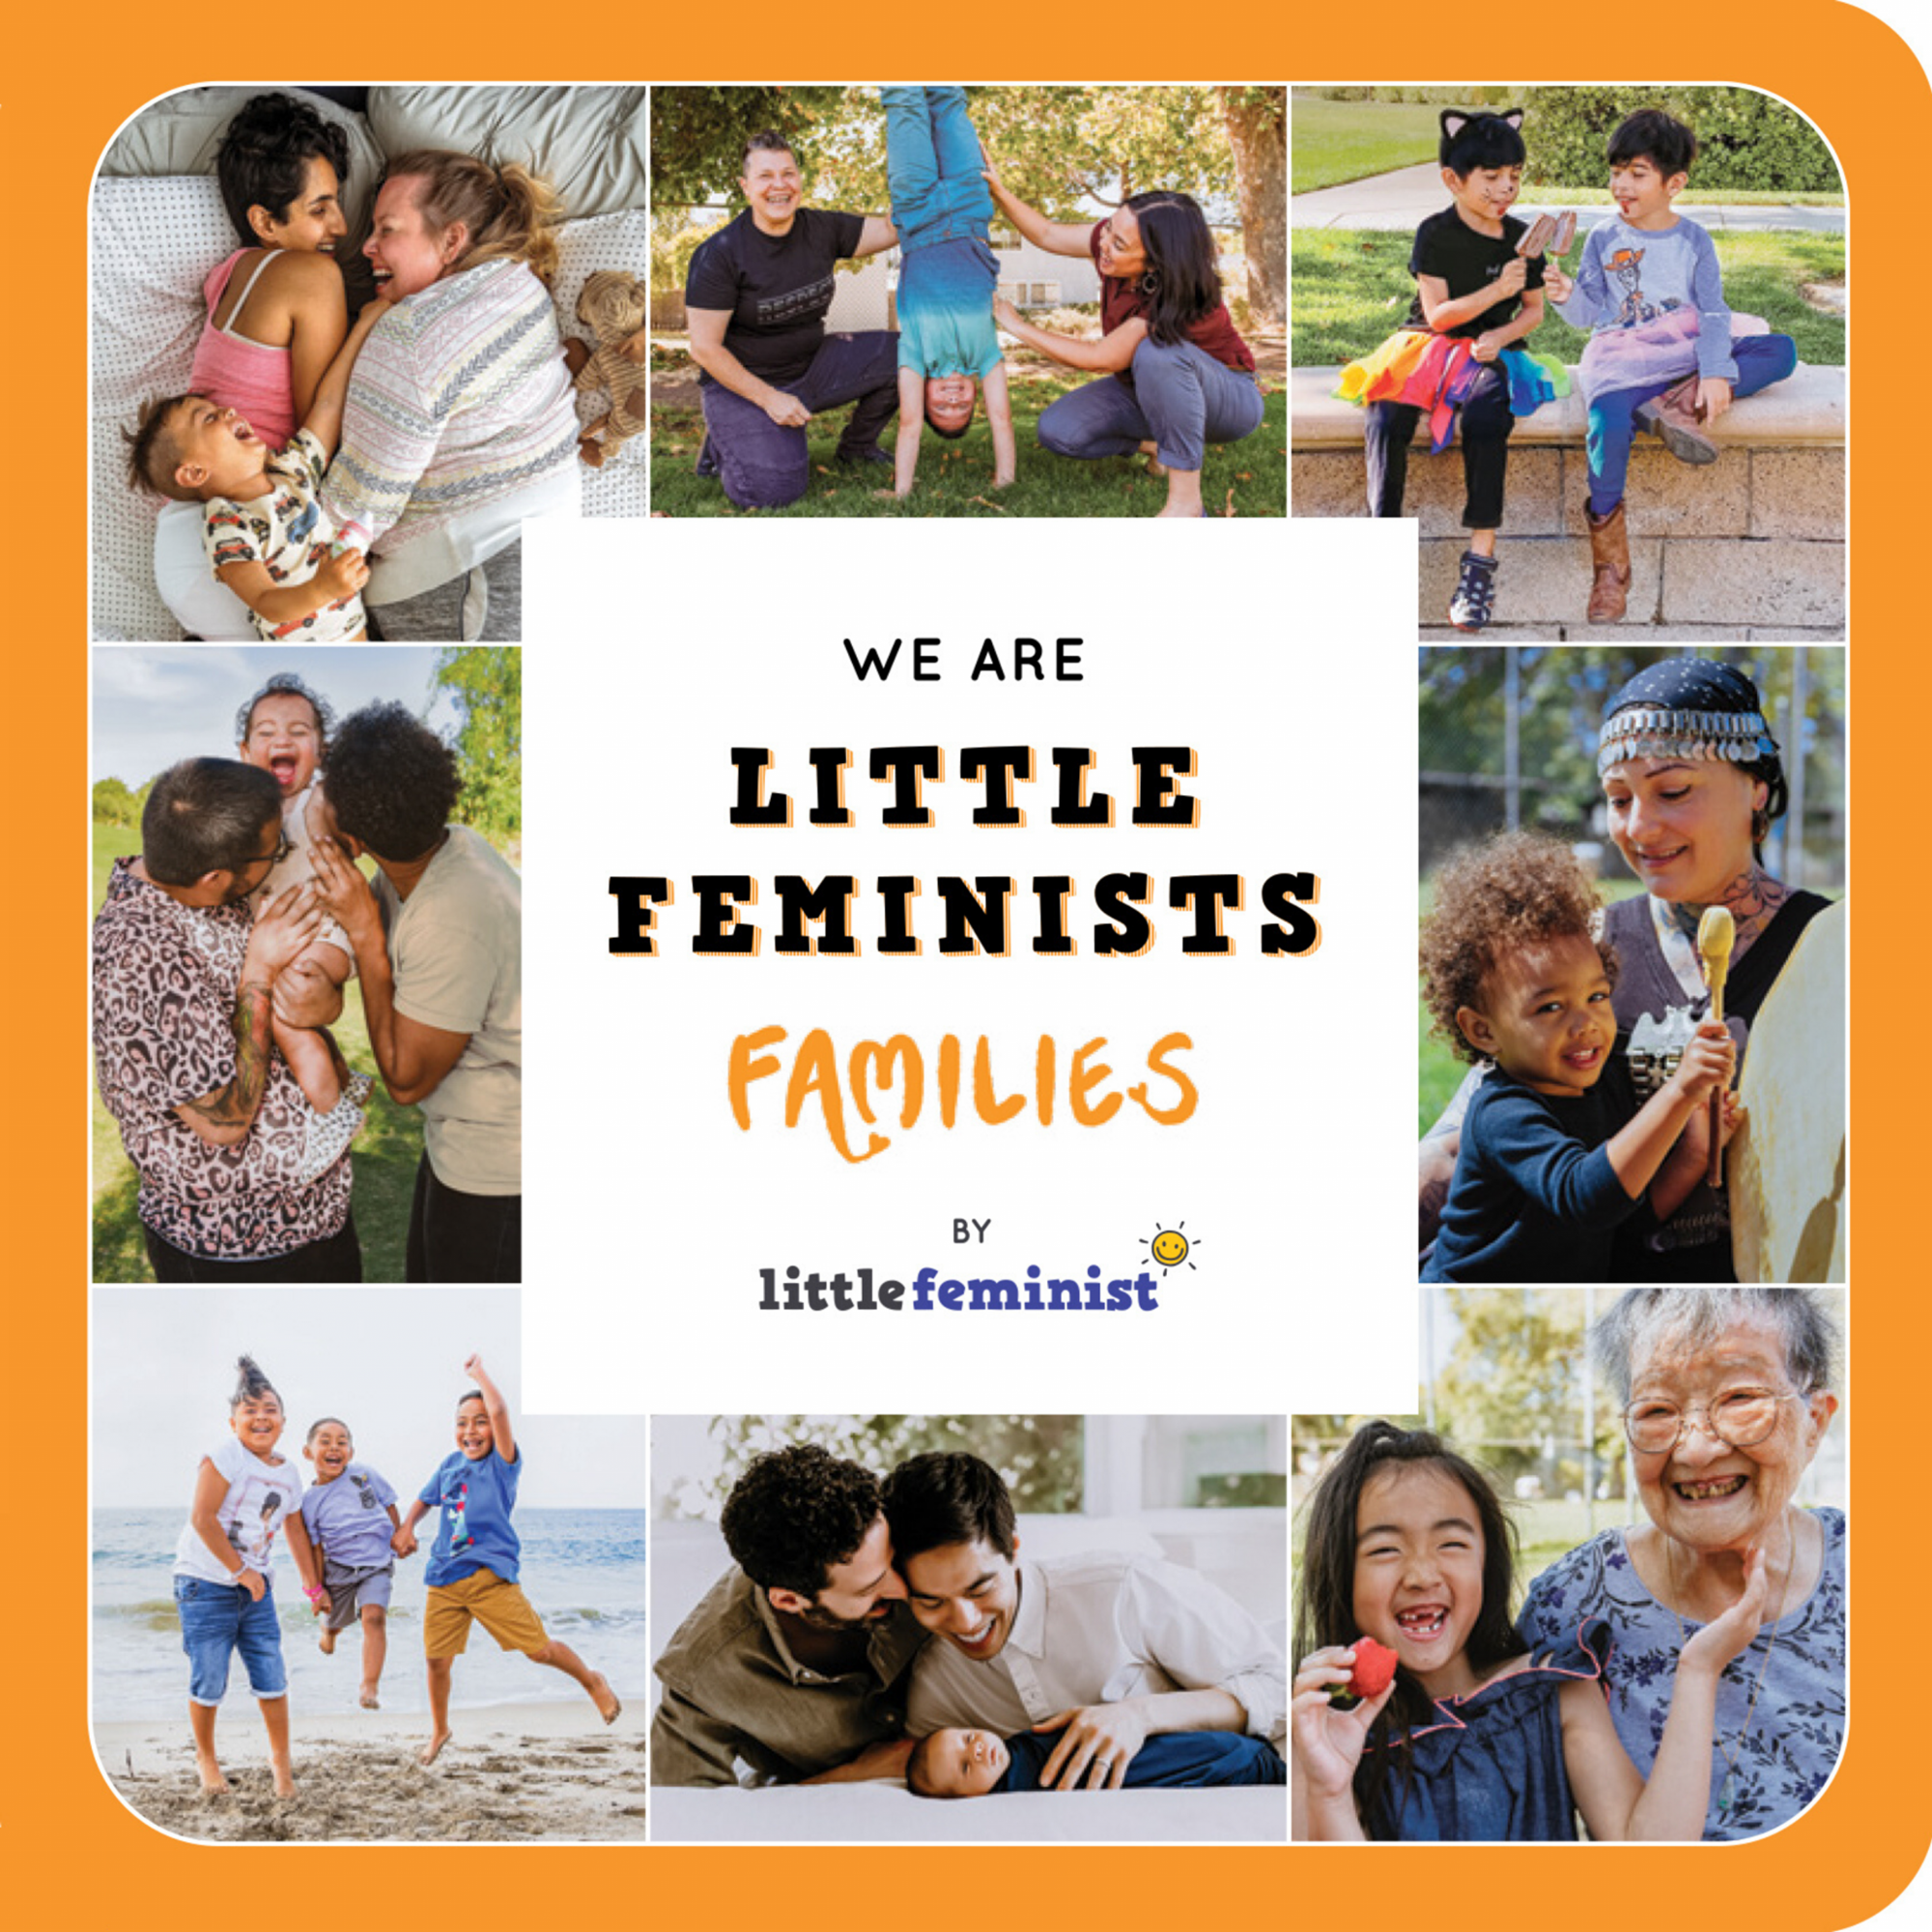 We are little feminists